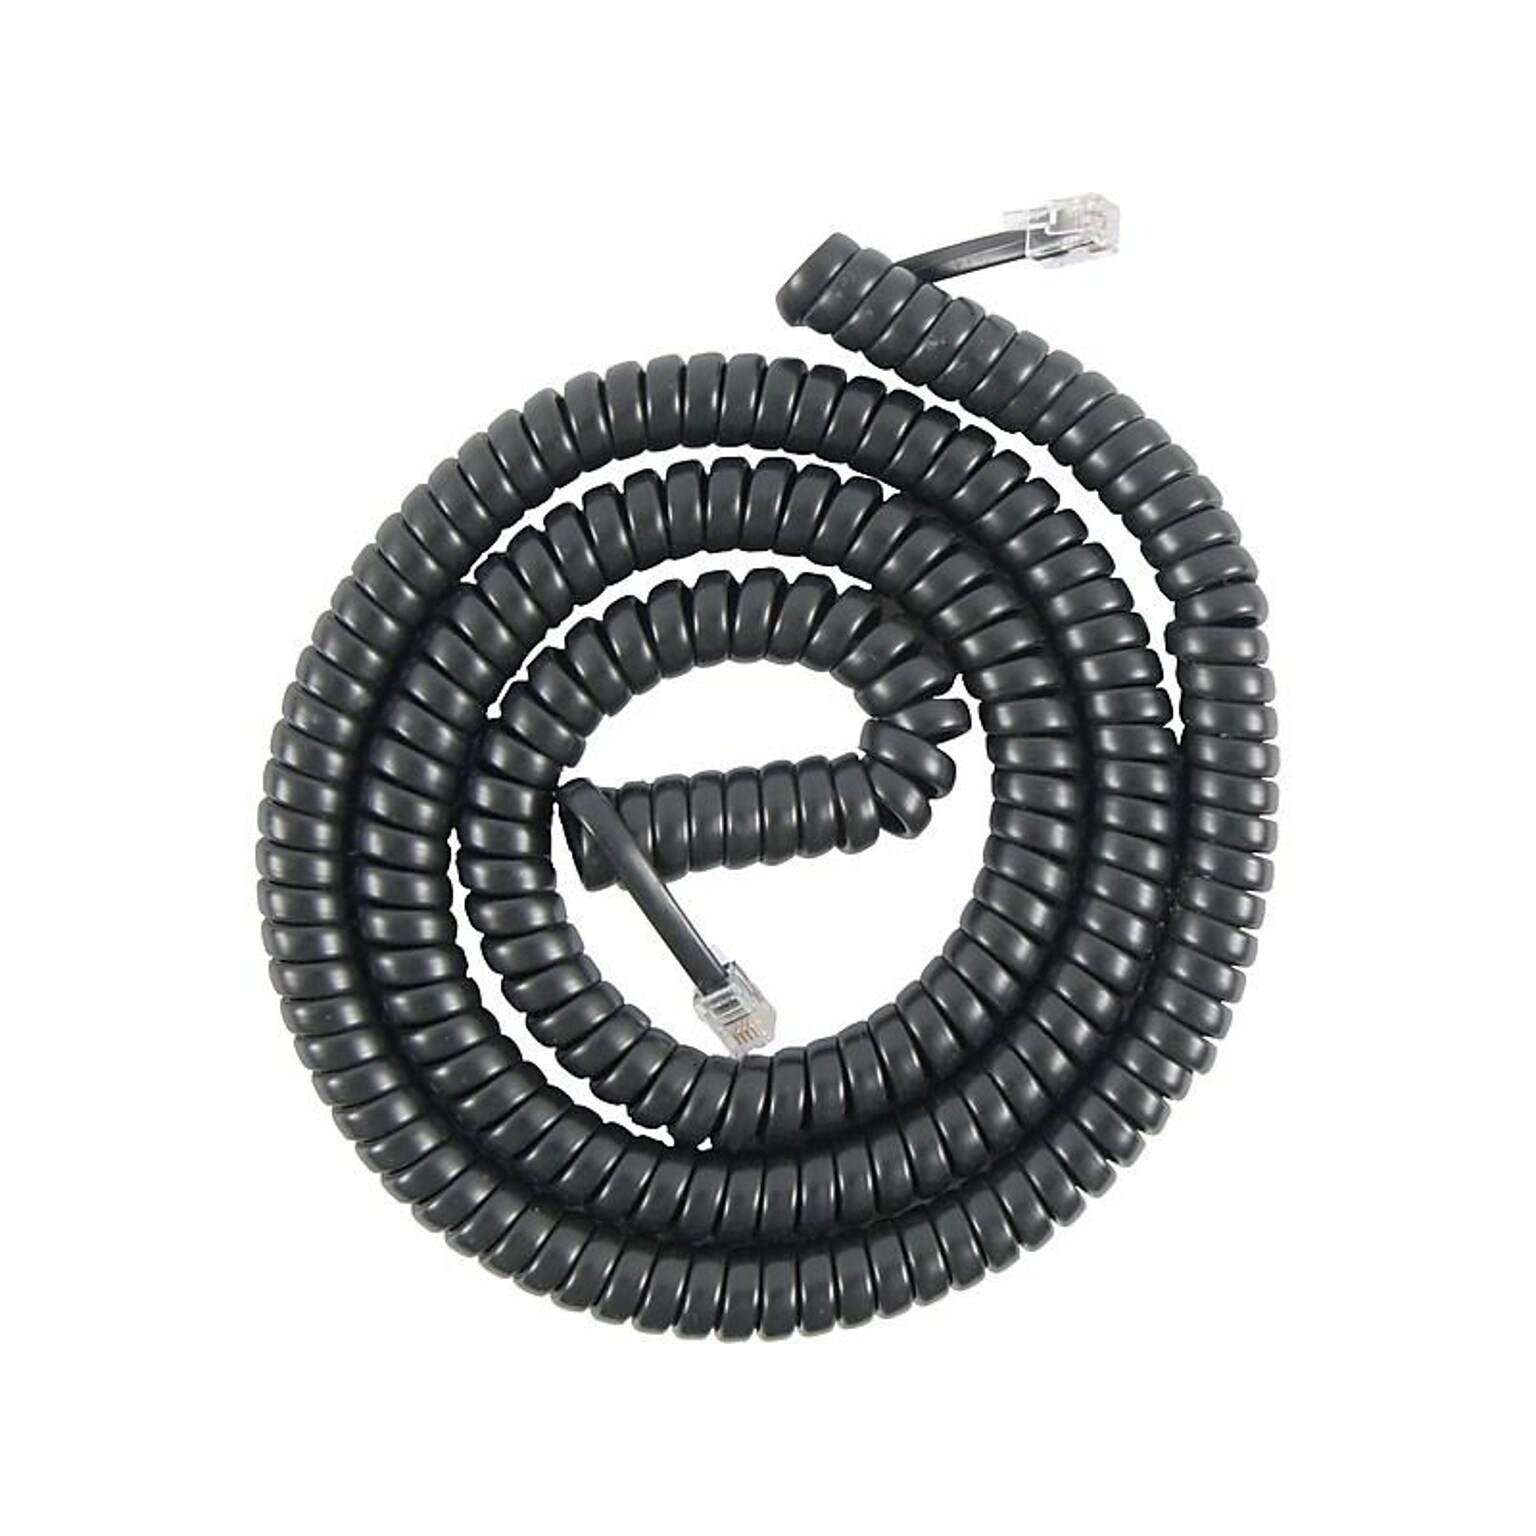 Power Gear 76139 25 Coiled Telephone Line Cord, Black